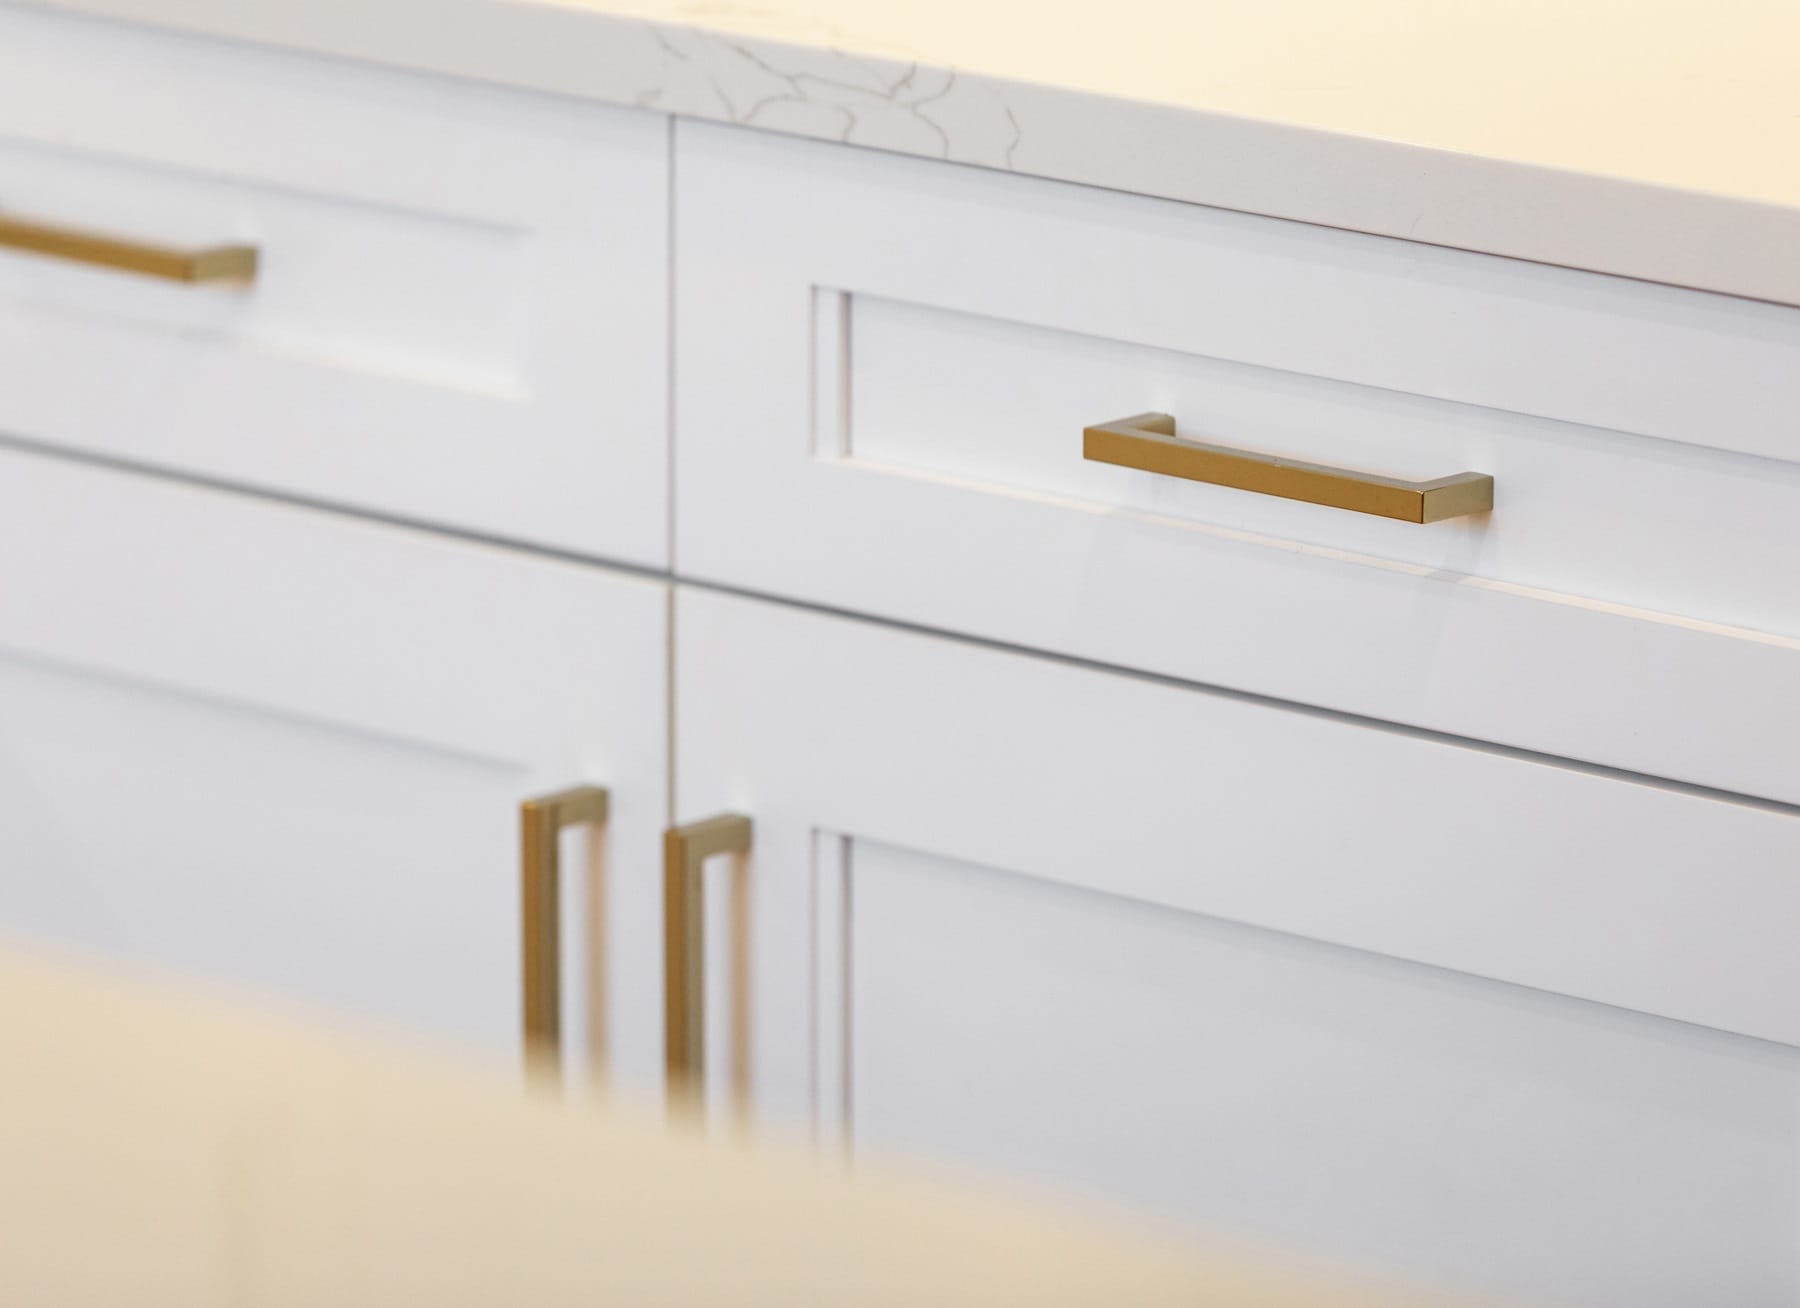 Gold Drawer Pulls on White Cabinets